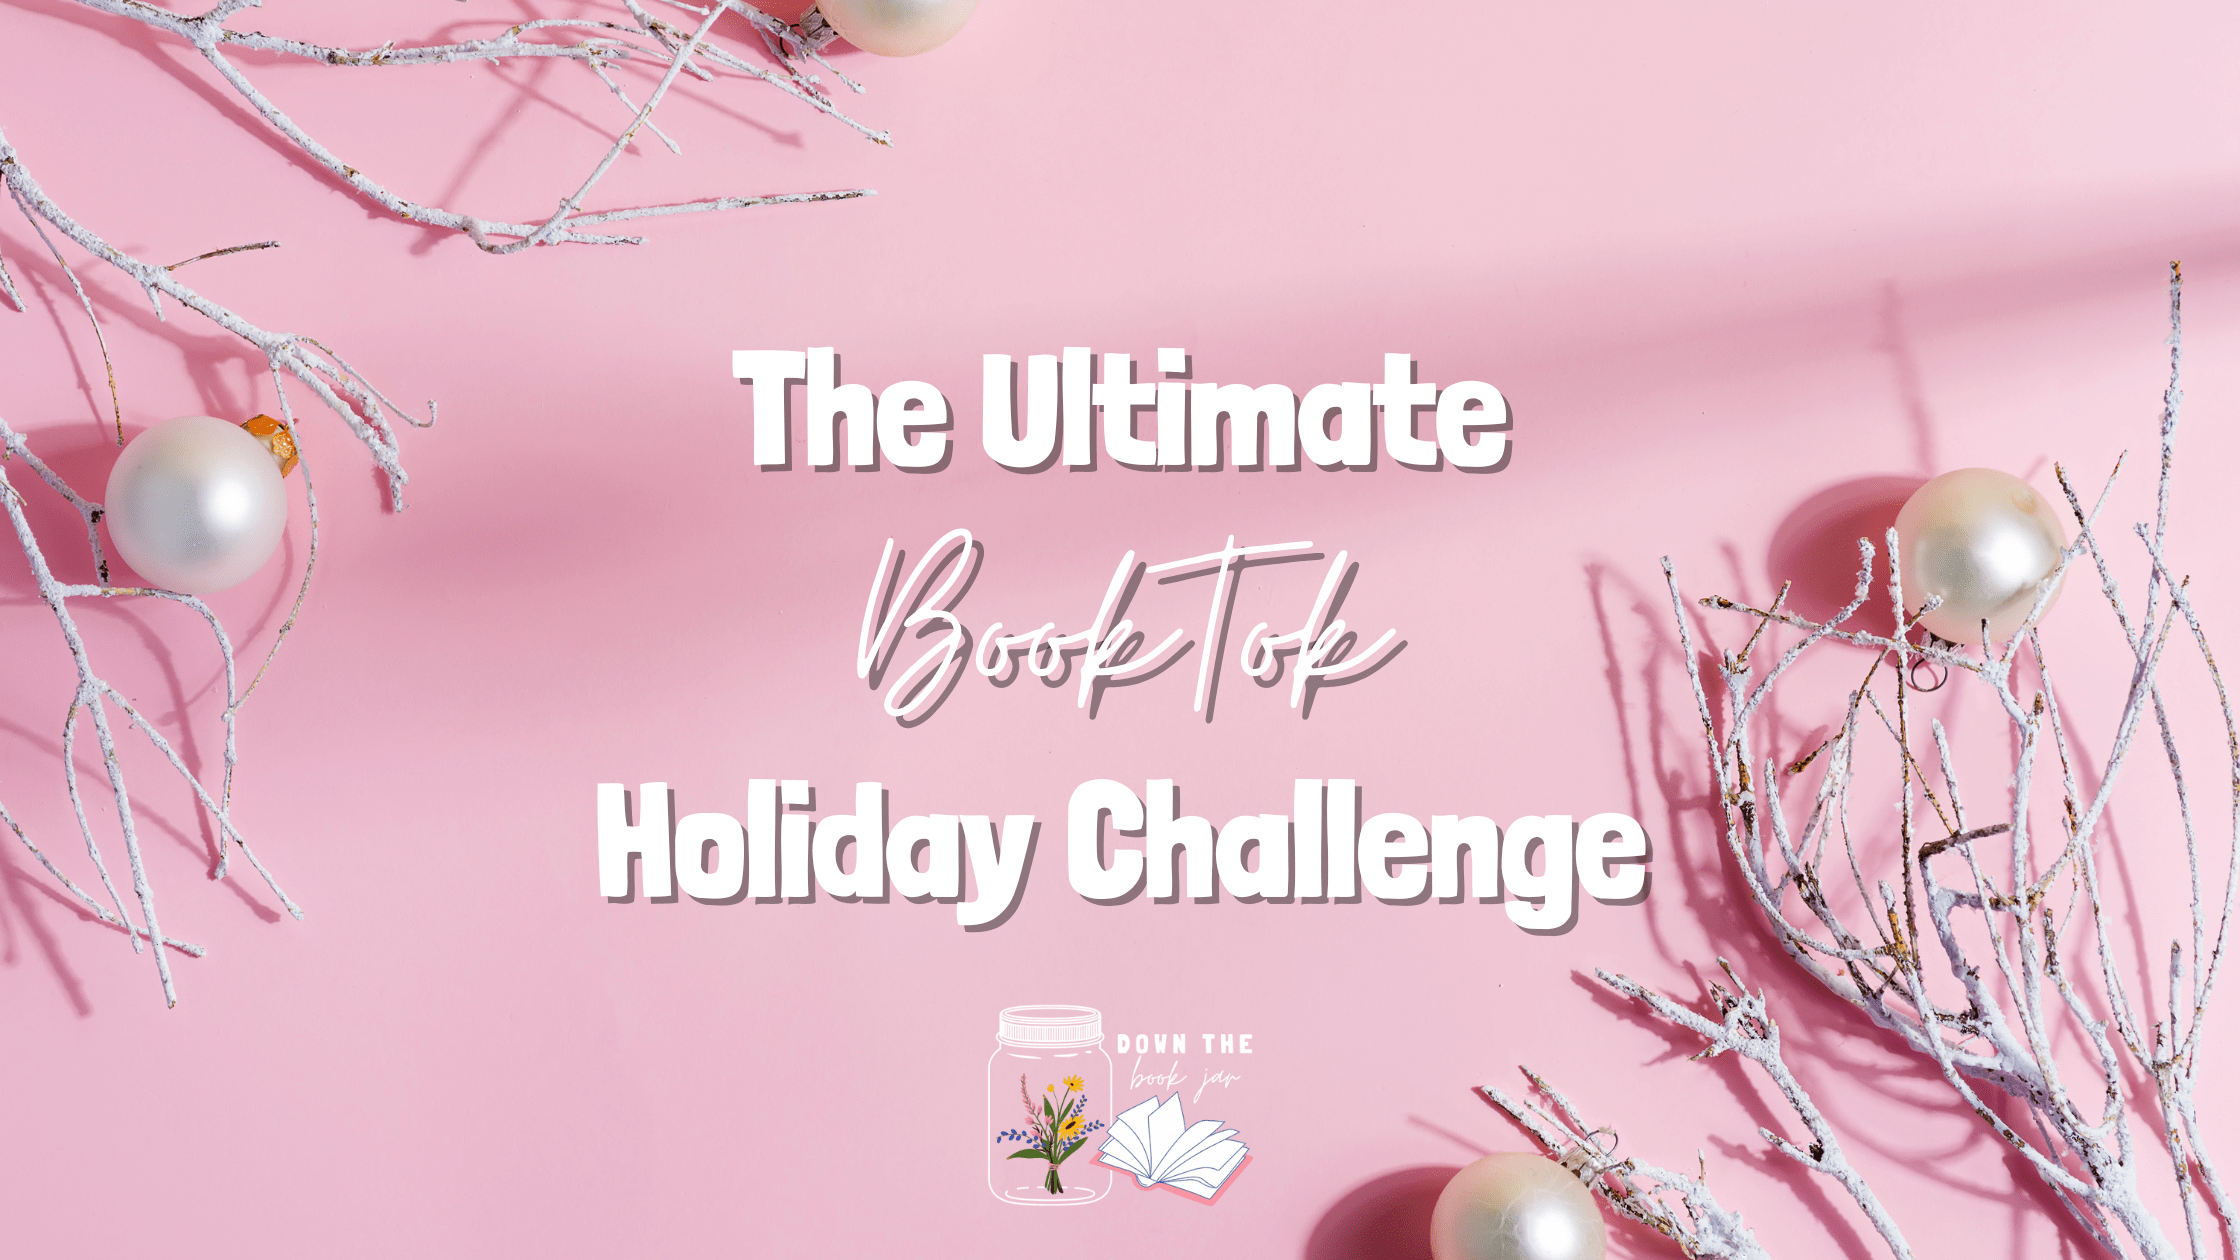 The Ultimate BookTok Holiday Challenge